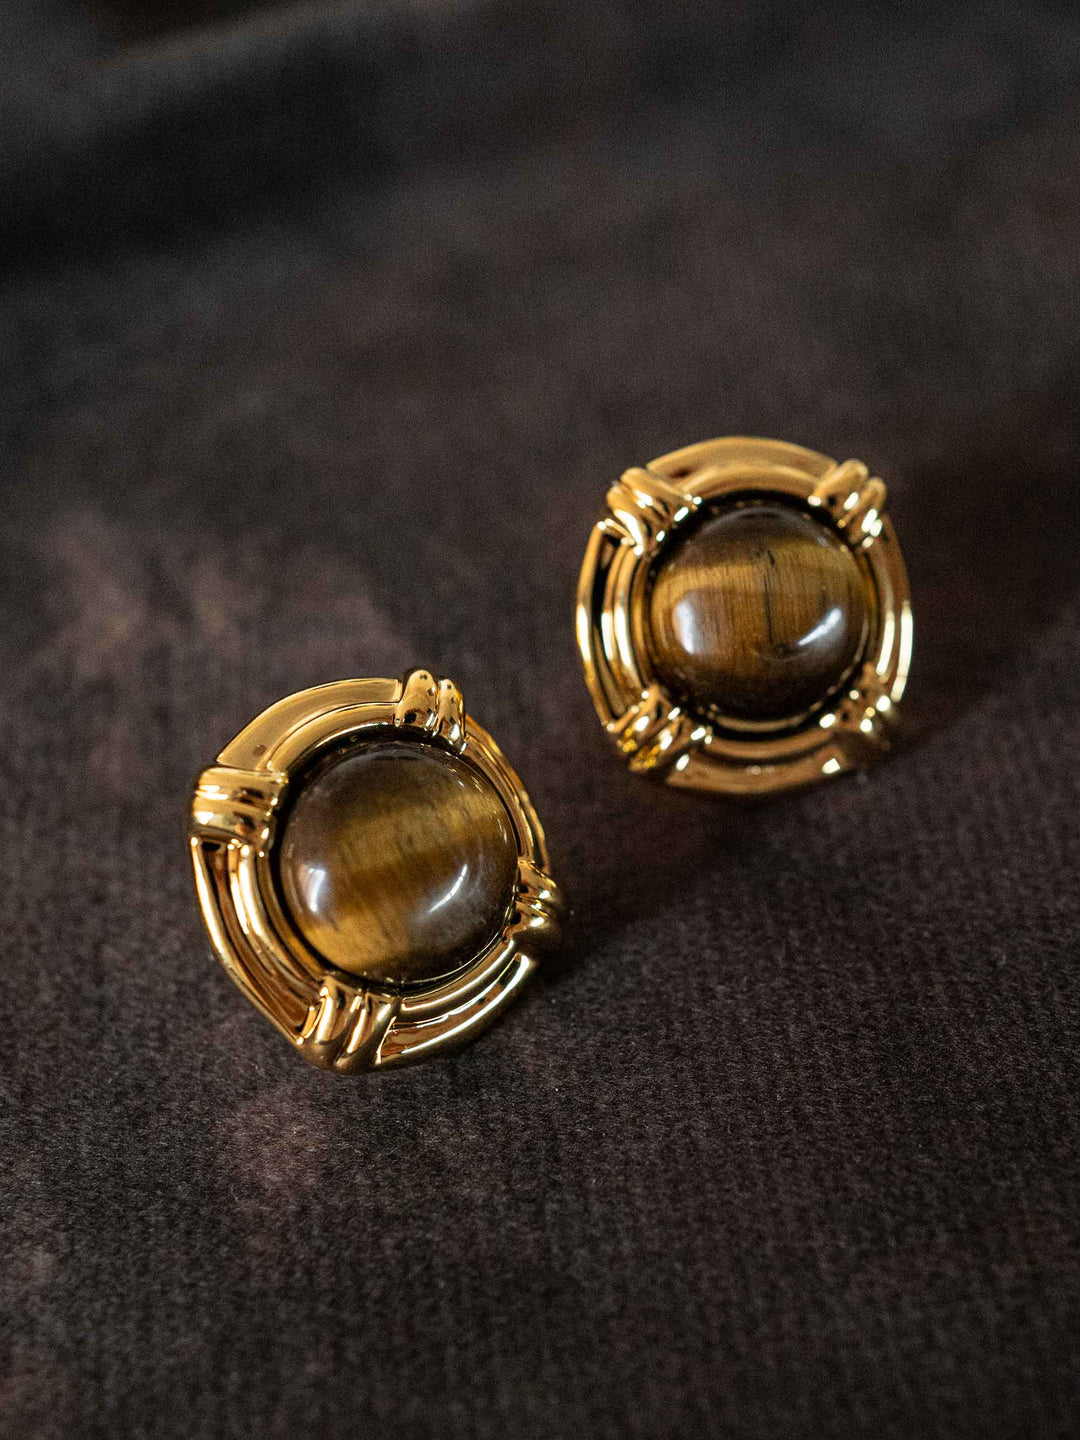 A pair of earrings with golden cat's eye stones